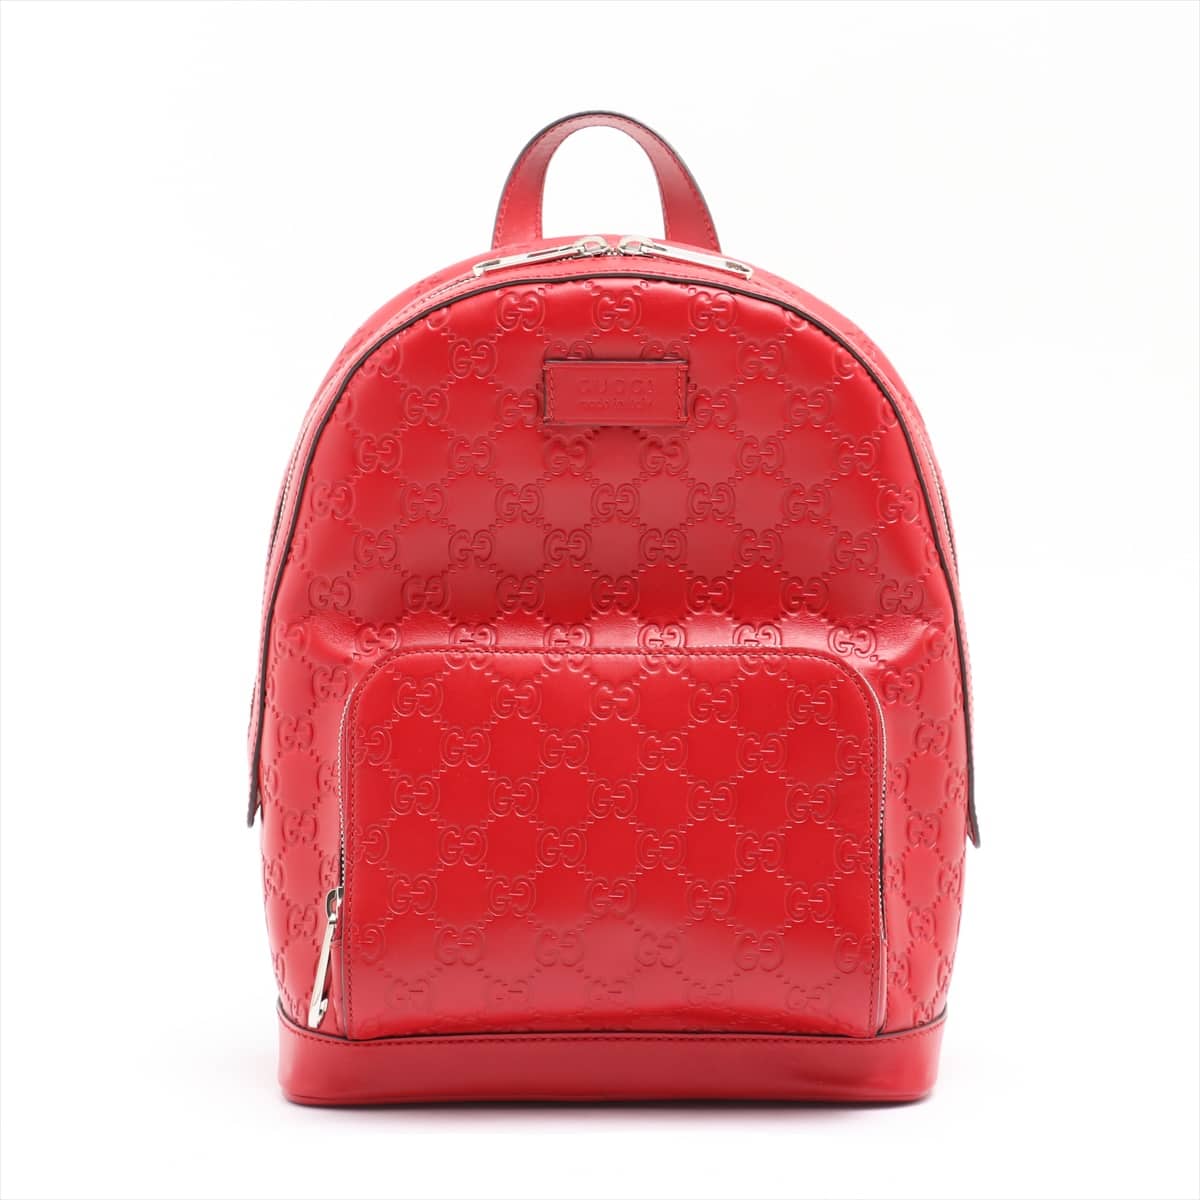 Gucci Guccissima Leather Backpack Red 450967